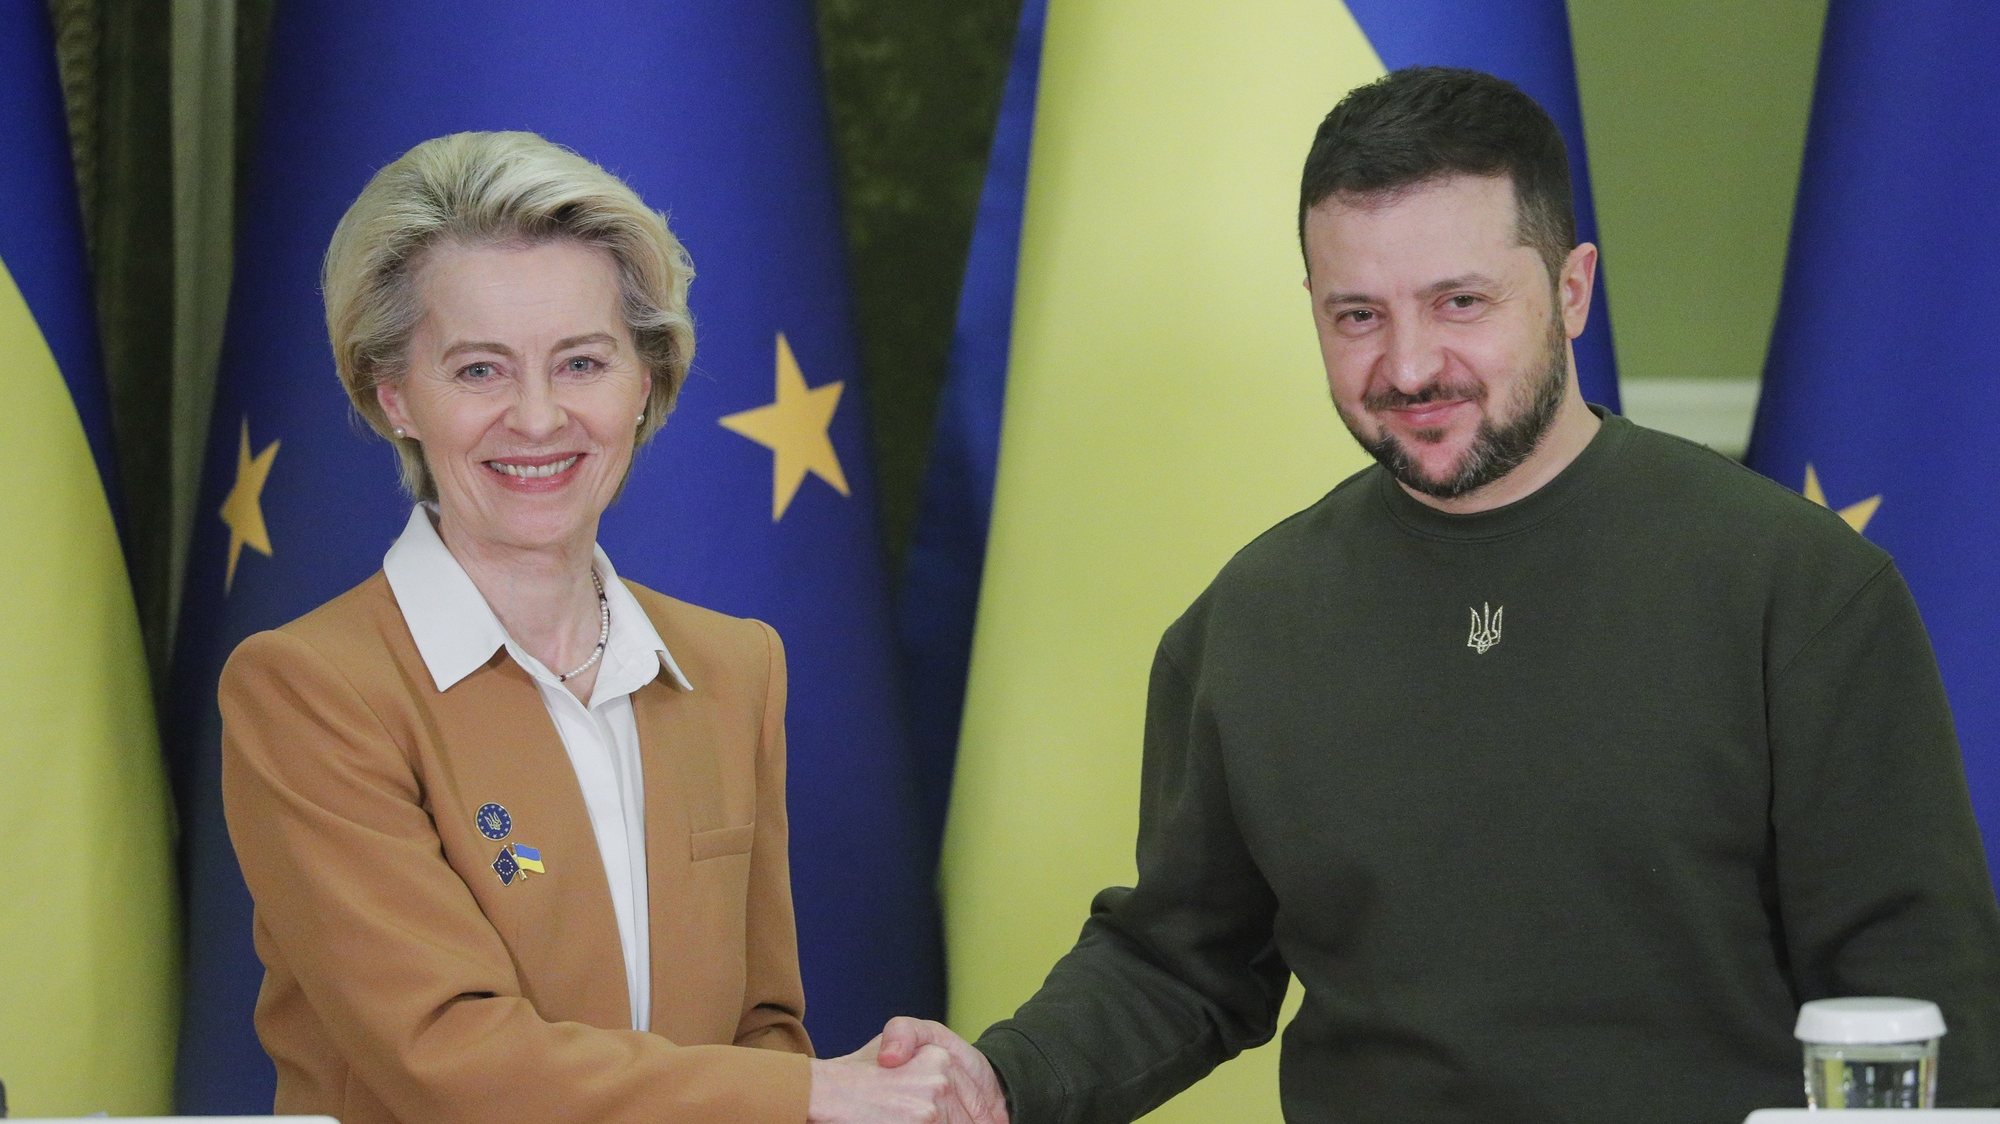 epa10444165 Ukrainian President Volodymyr Zelensky (R) and European Commission President Ursula von der Leyen (L) shake hands after a joint press conference following their meeting in Kyiv, Ukraine, 02 February 2023. Von der Leyen and Commissioners arrived in Kyiv to meet with Ukrainian top officials a day before attending a EU-Ukraine summit meeting on 03 January, the first EU-Ukraine summit since since the European Council granted Ukraine the status of candidate country amid the Russian invasion.  EPA/SERGEY DOLZHENKO